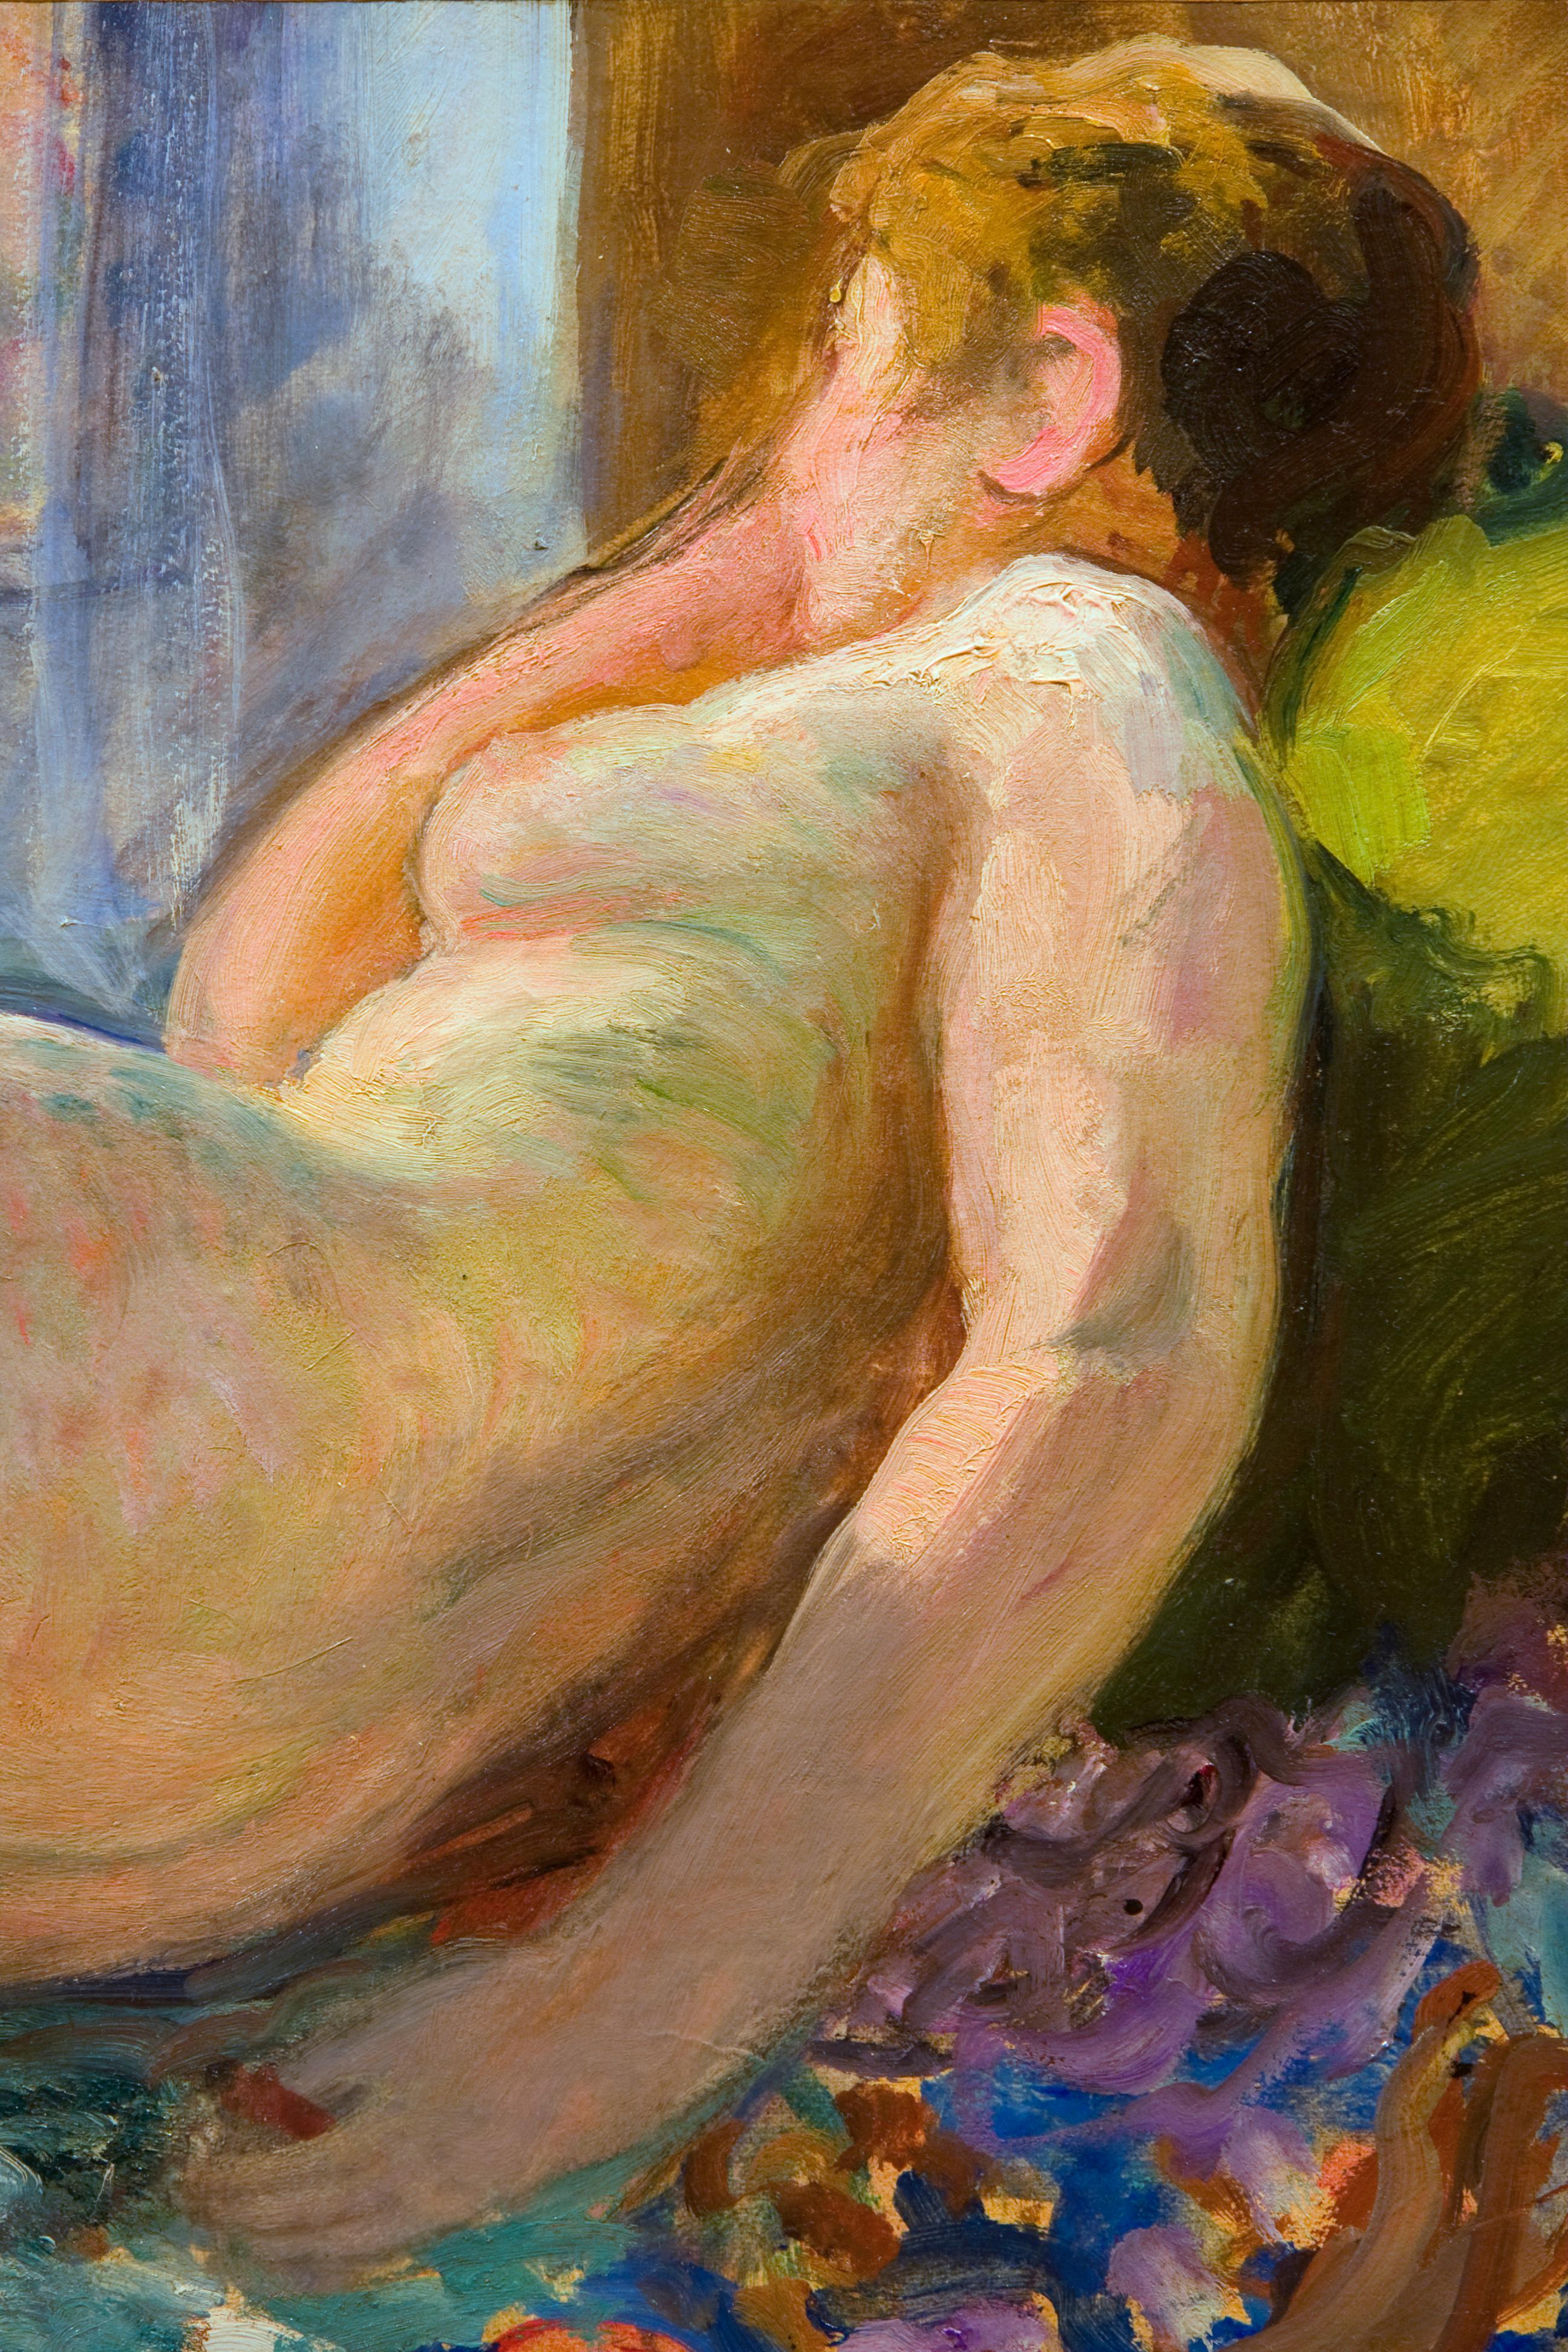 Early 20th Century Impressionist painting, Nude on Divan - Brown Figurative Painting by Henri Lebasque